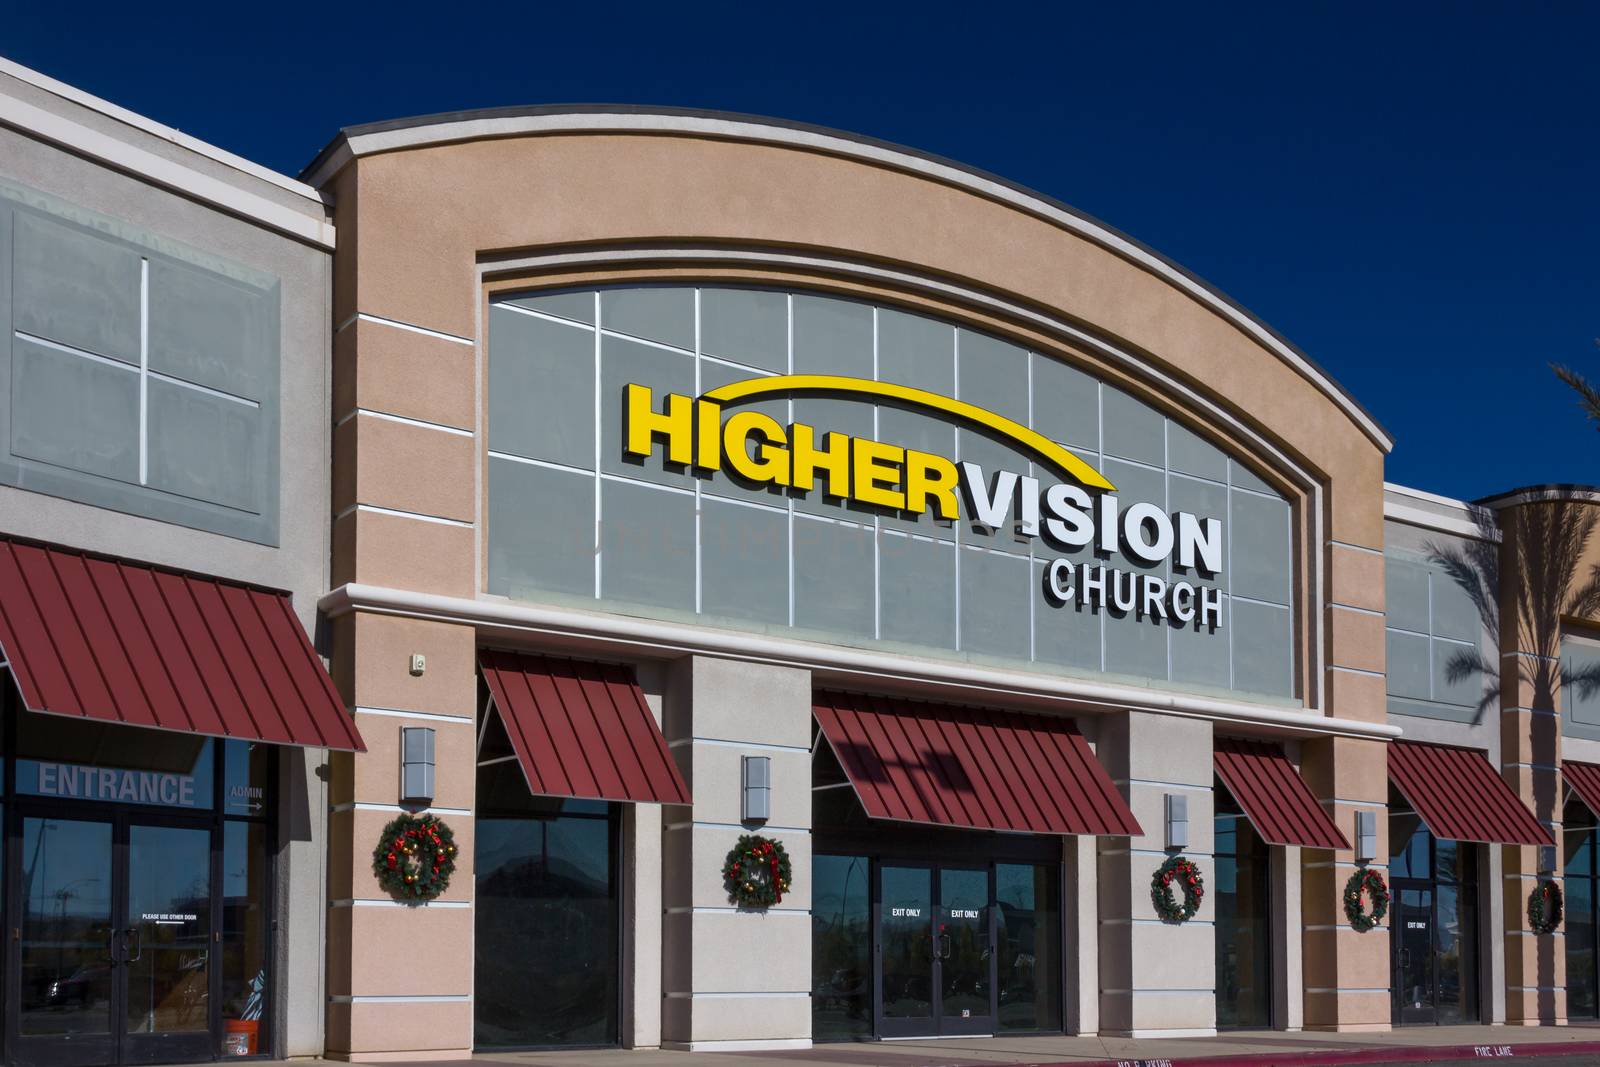 Higher Vision Church Exterior and Logo by wolterk